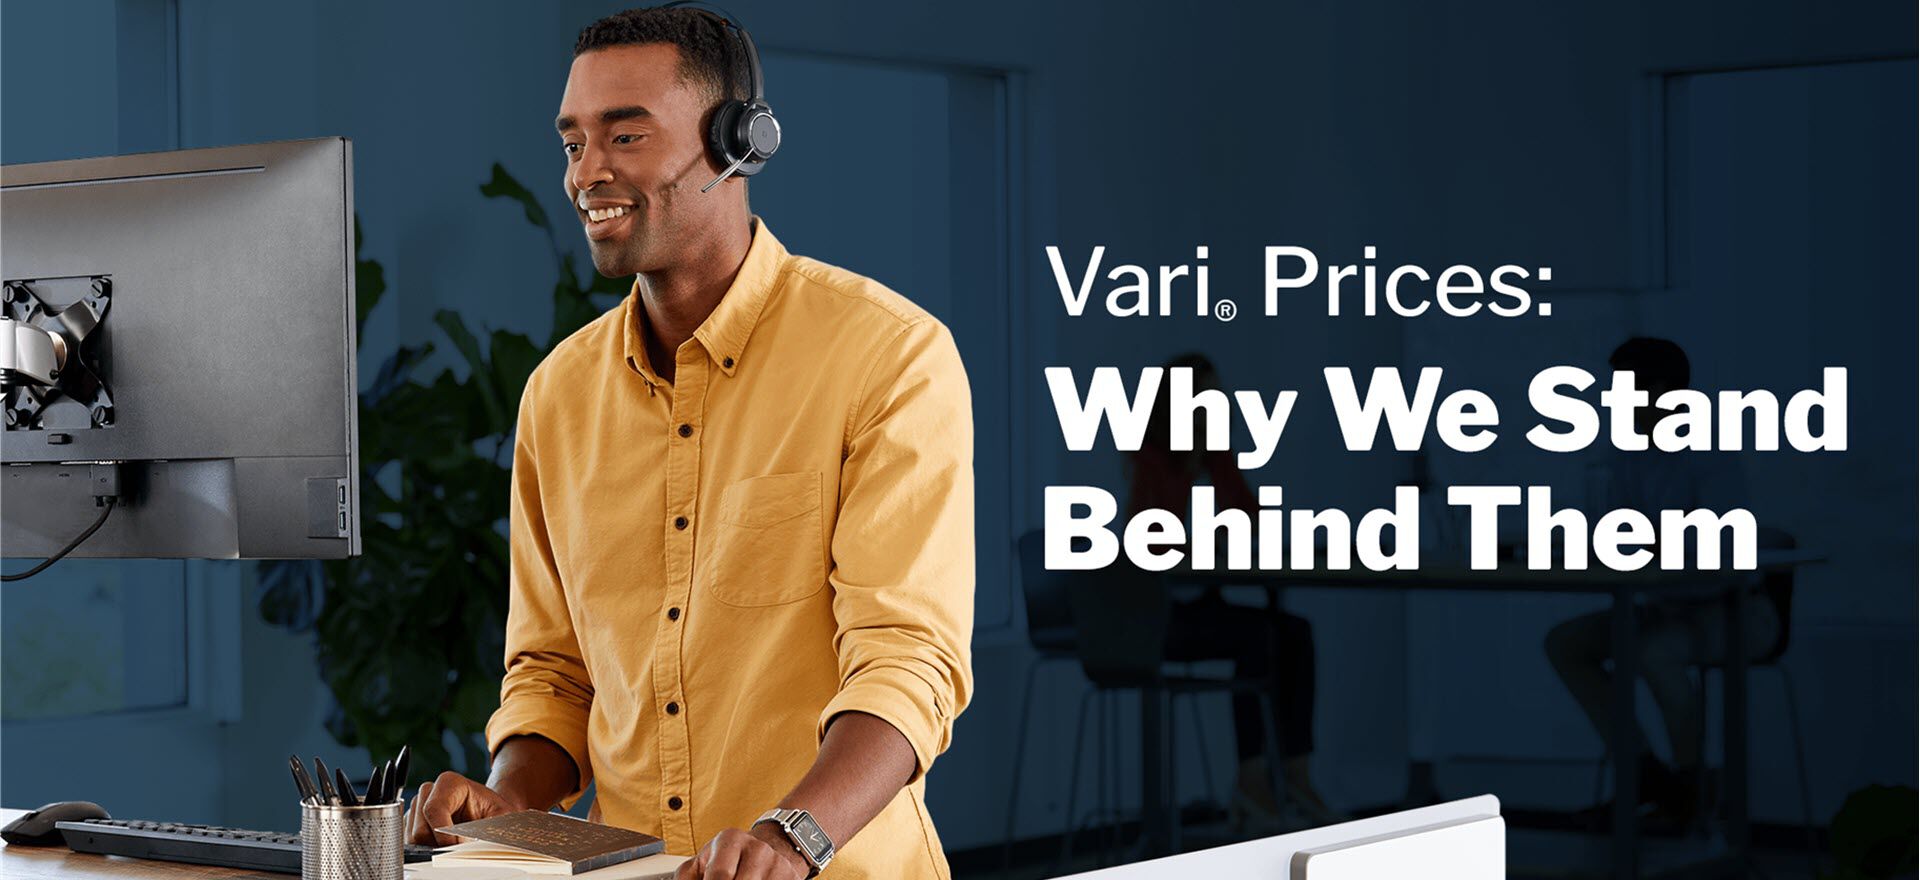 professional working at vari table with headset with the following text - vari prices why we stand behind them